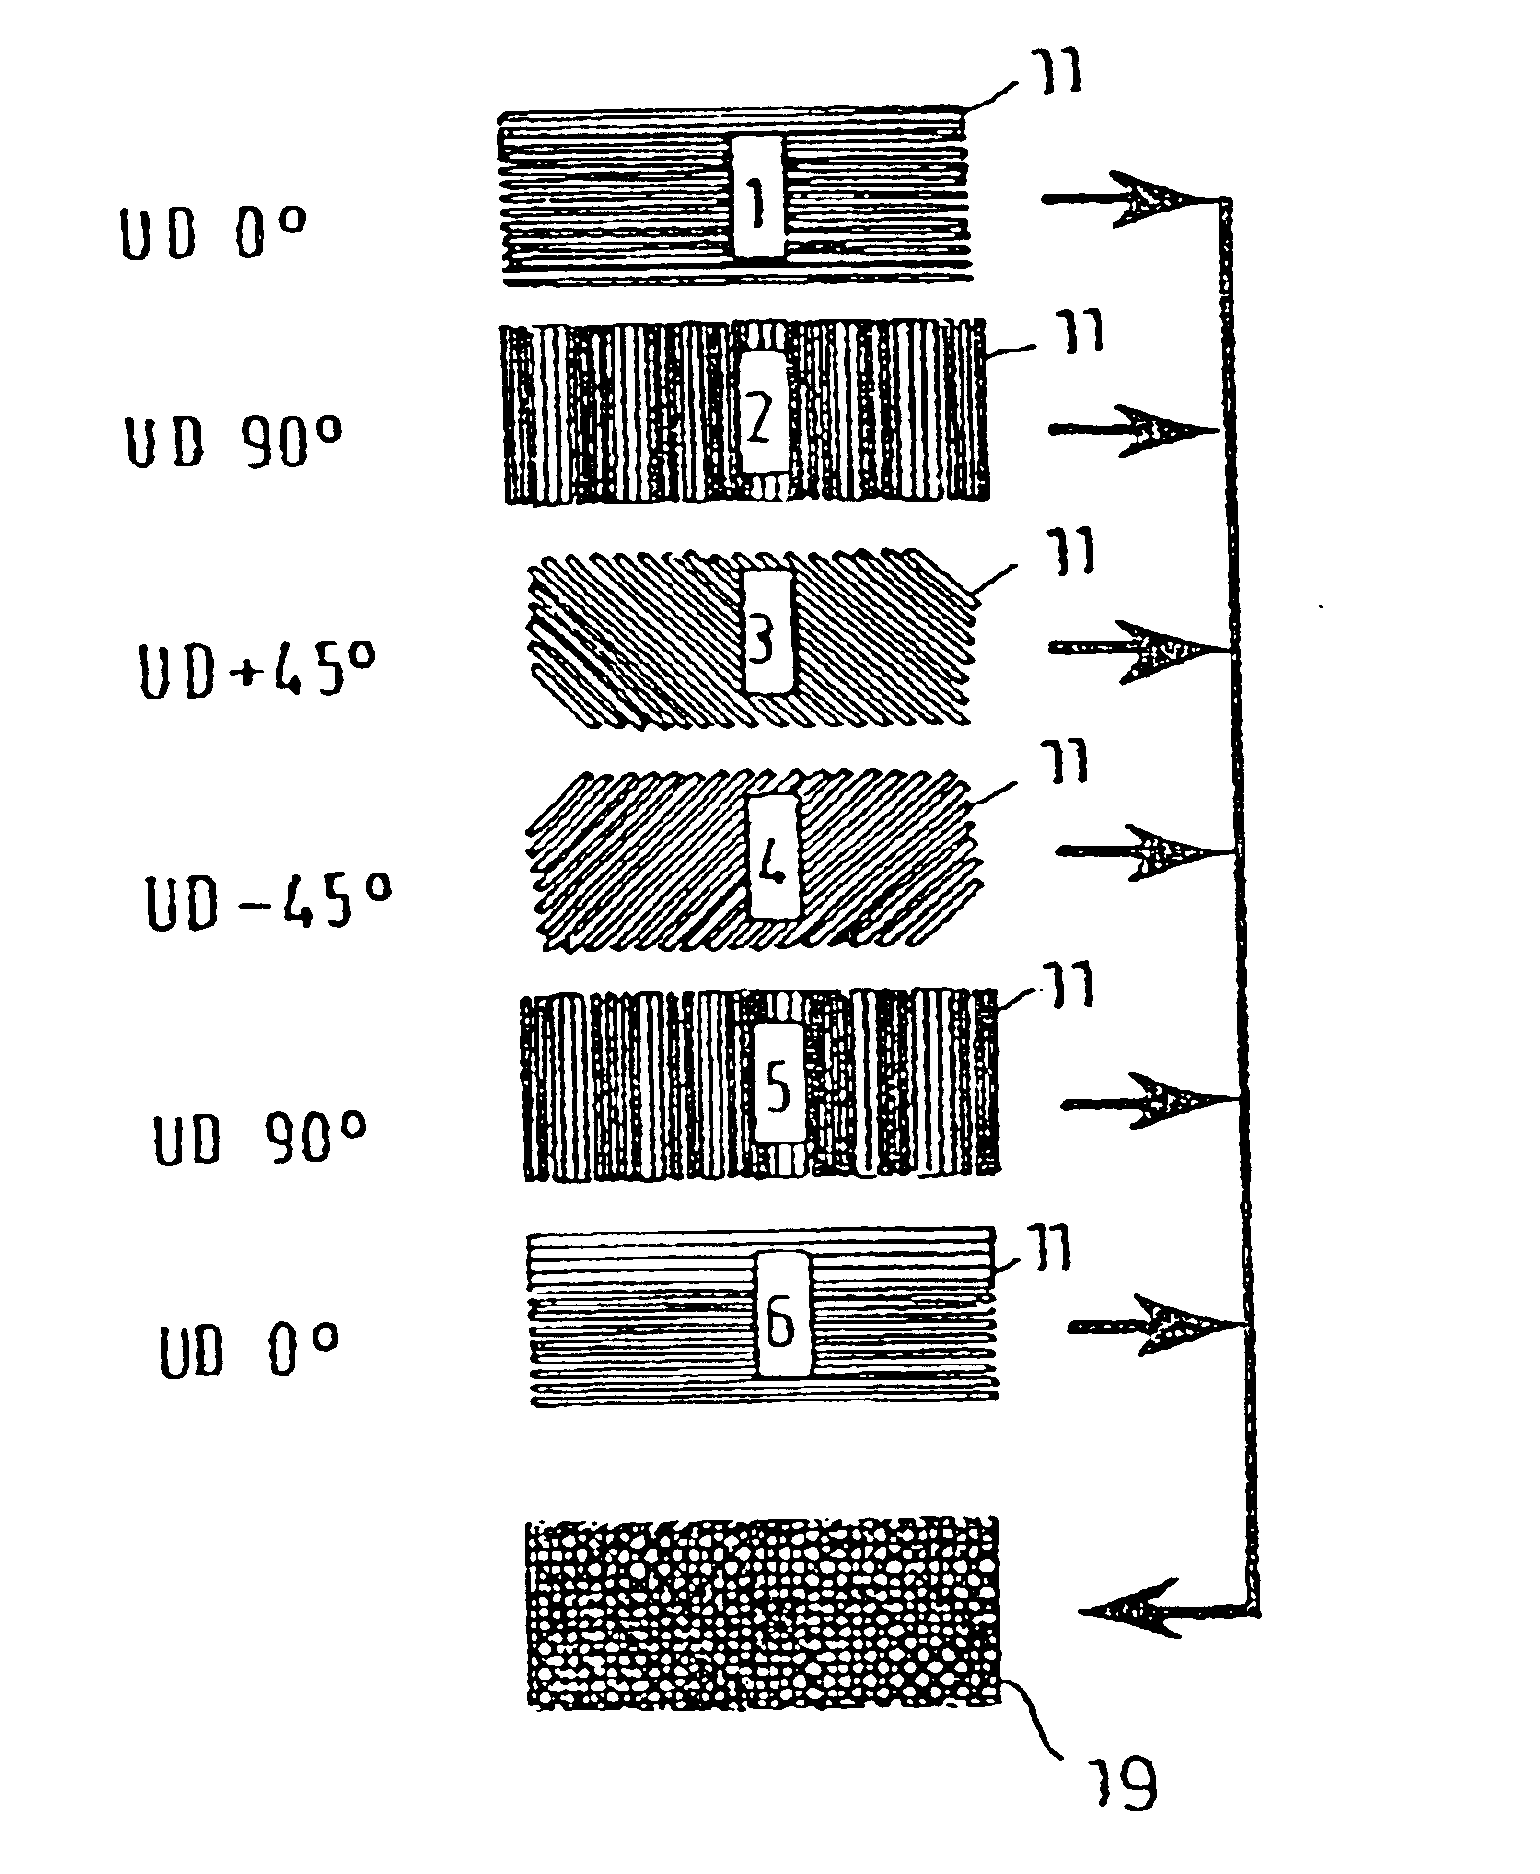 Carbon-fibre-reinforced SMC for multi-axially reinforced components